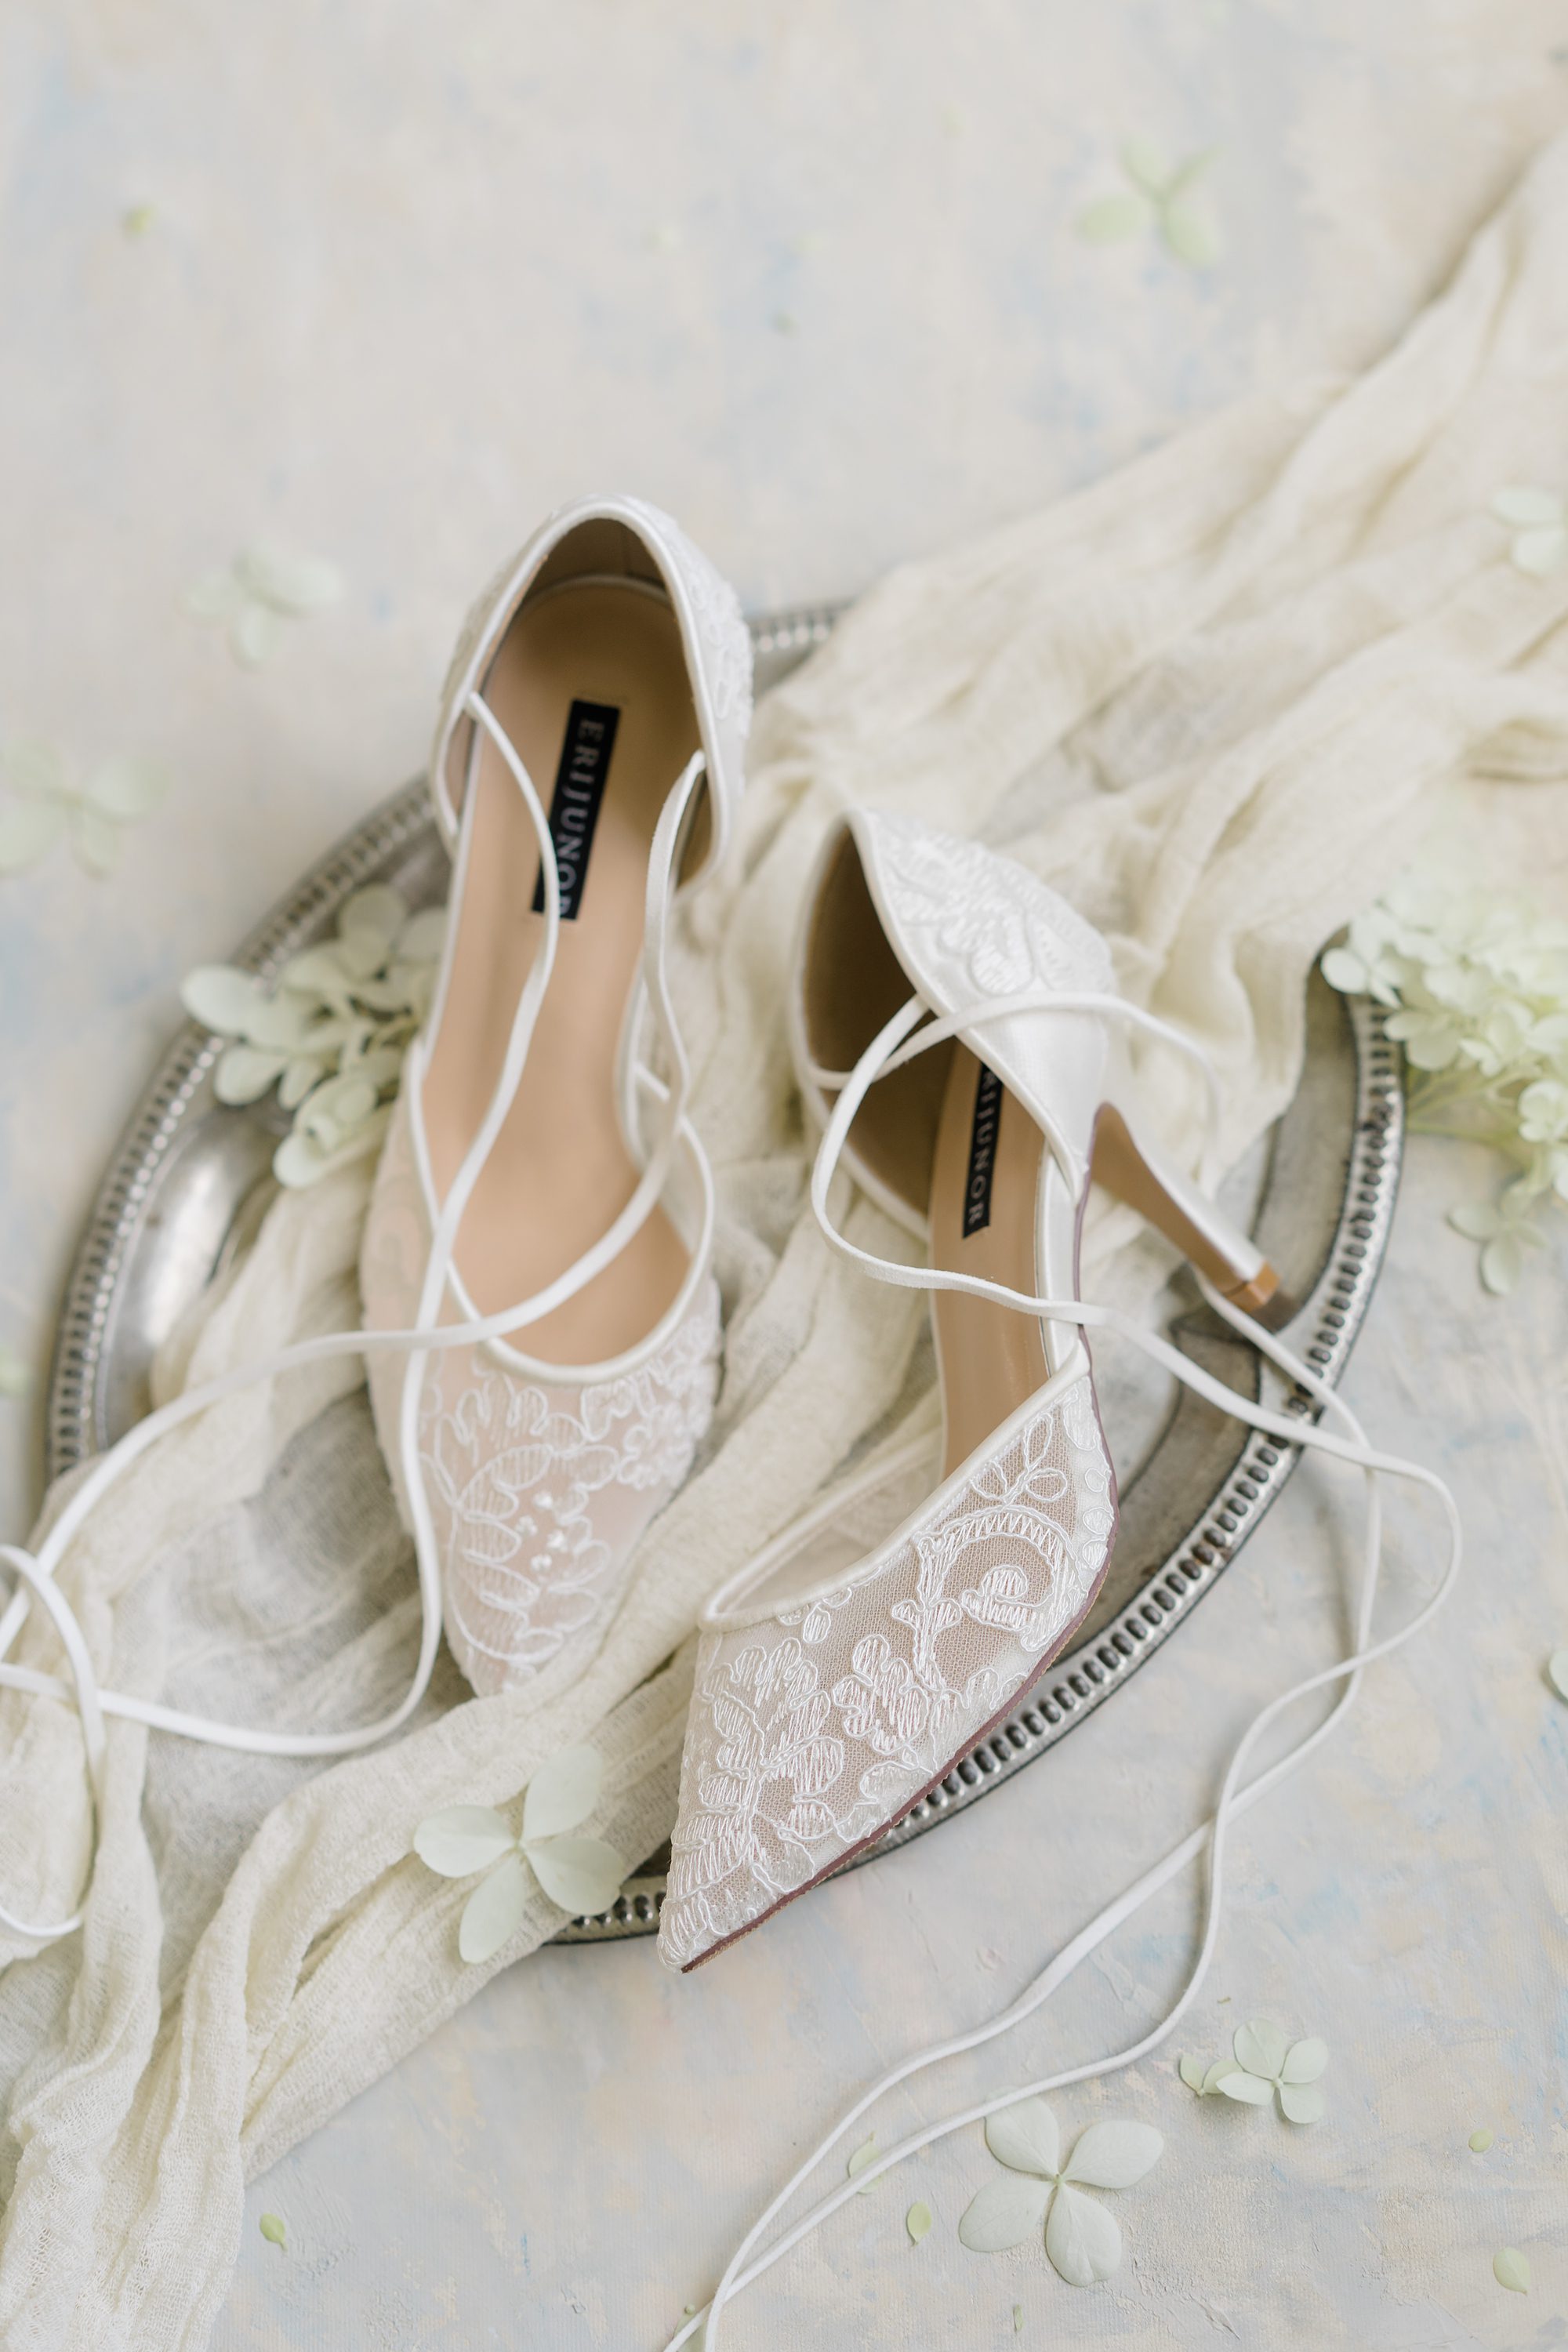 Wedding Day Details to have ready for your photographer: bride shoes and jewelry